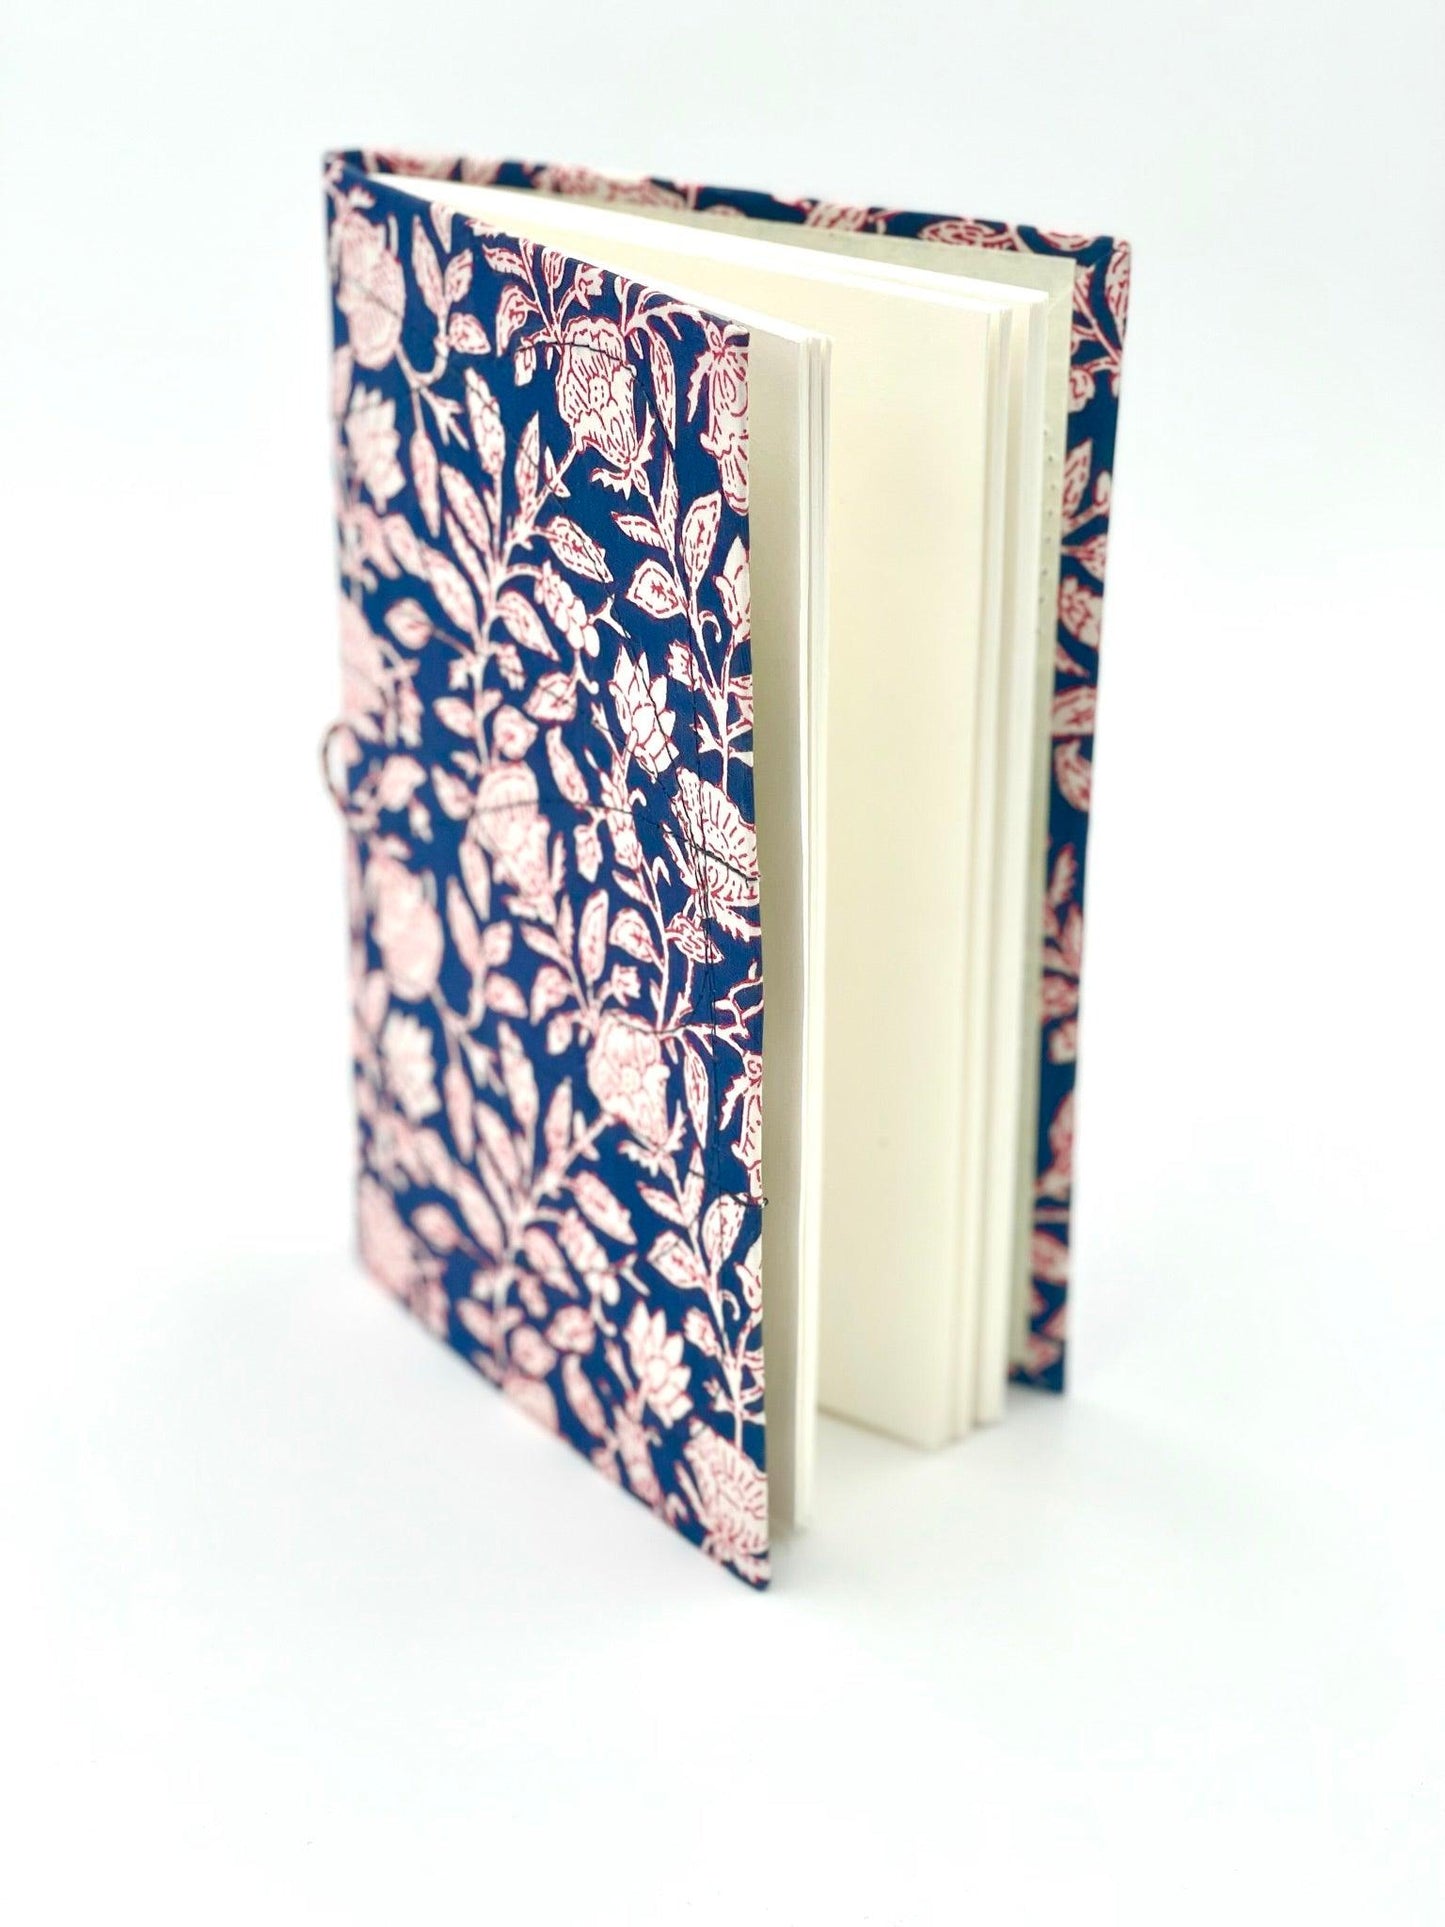 Block Print Journal/Notebook, Navy Blue & White - Unlined, 100 Pages, Thick Paper, Hard Cover - Transcend